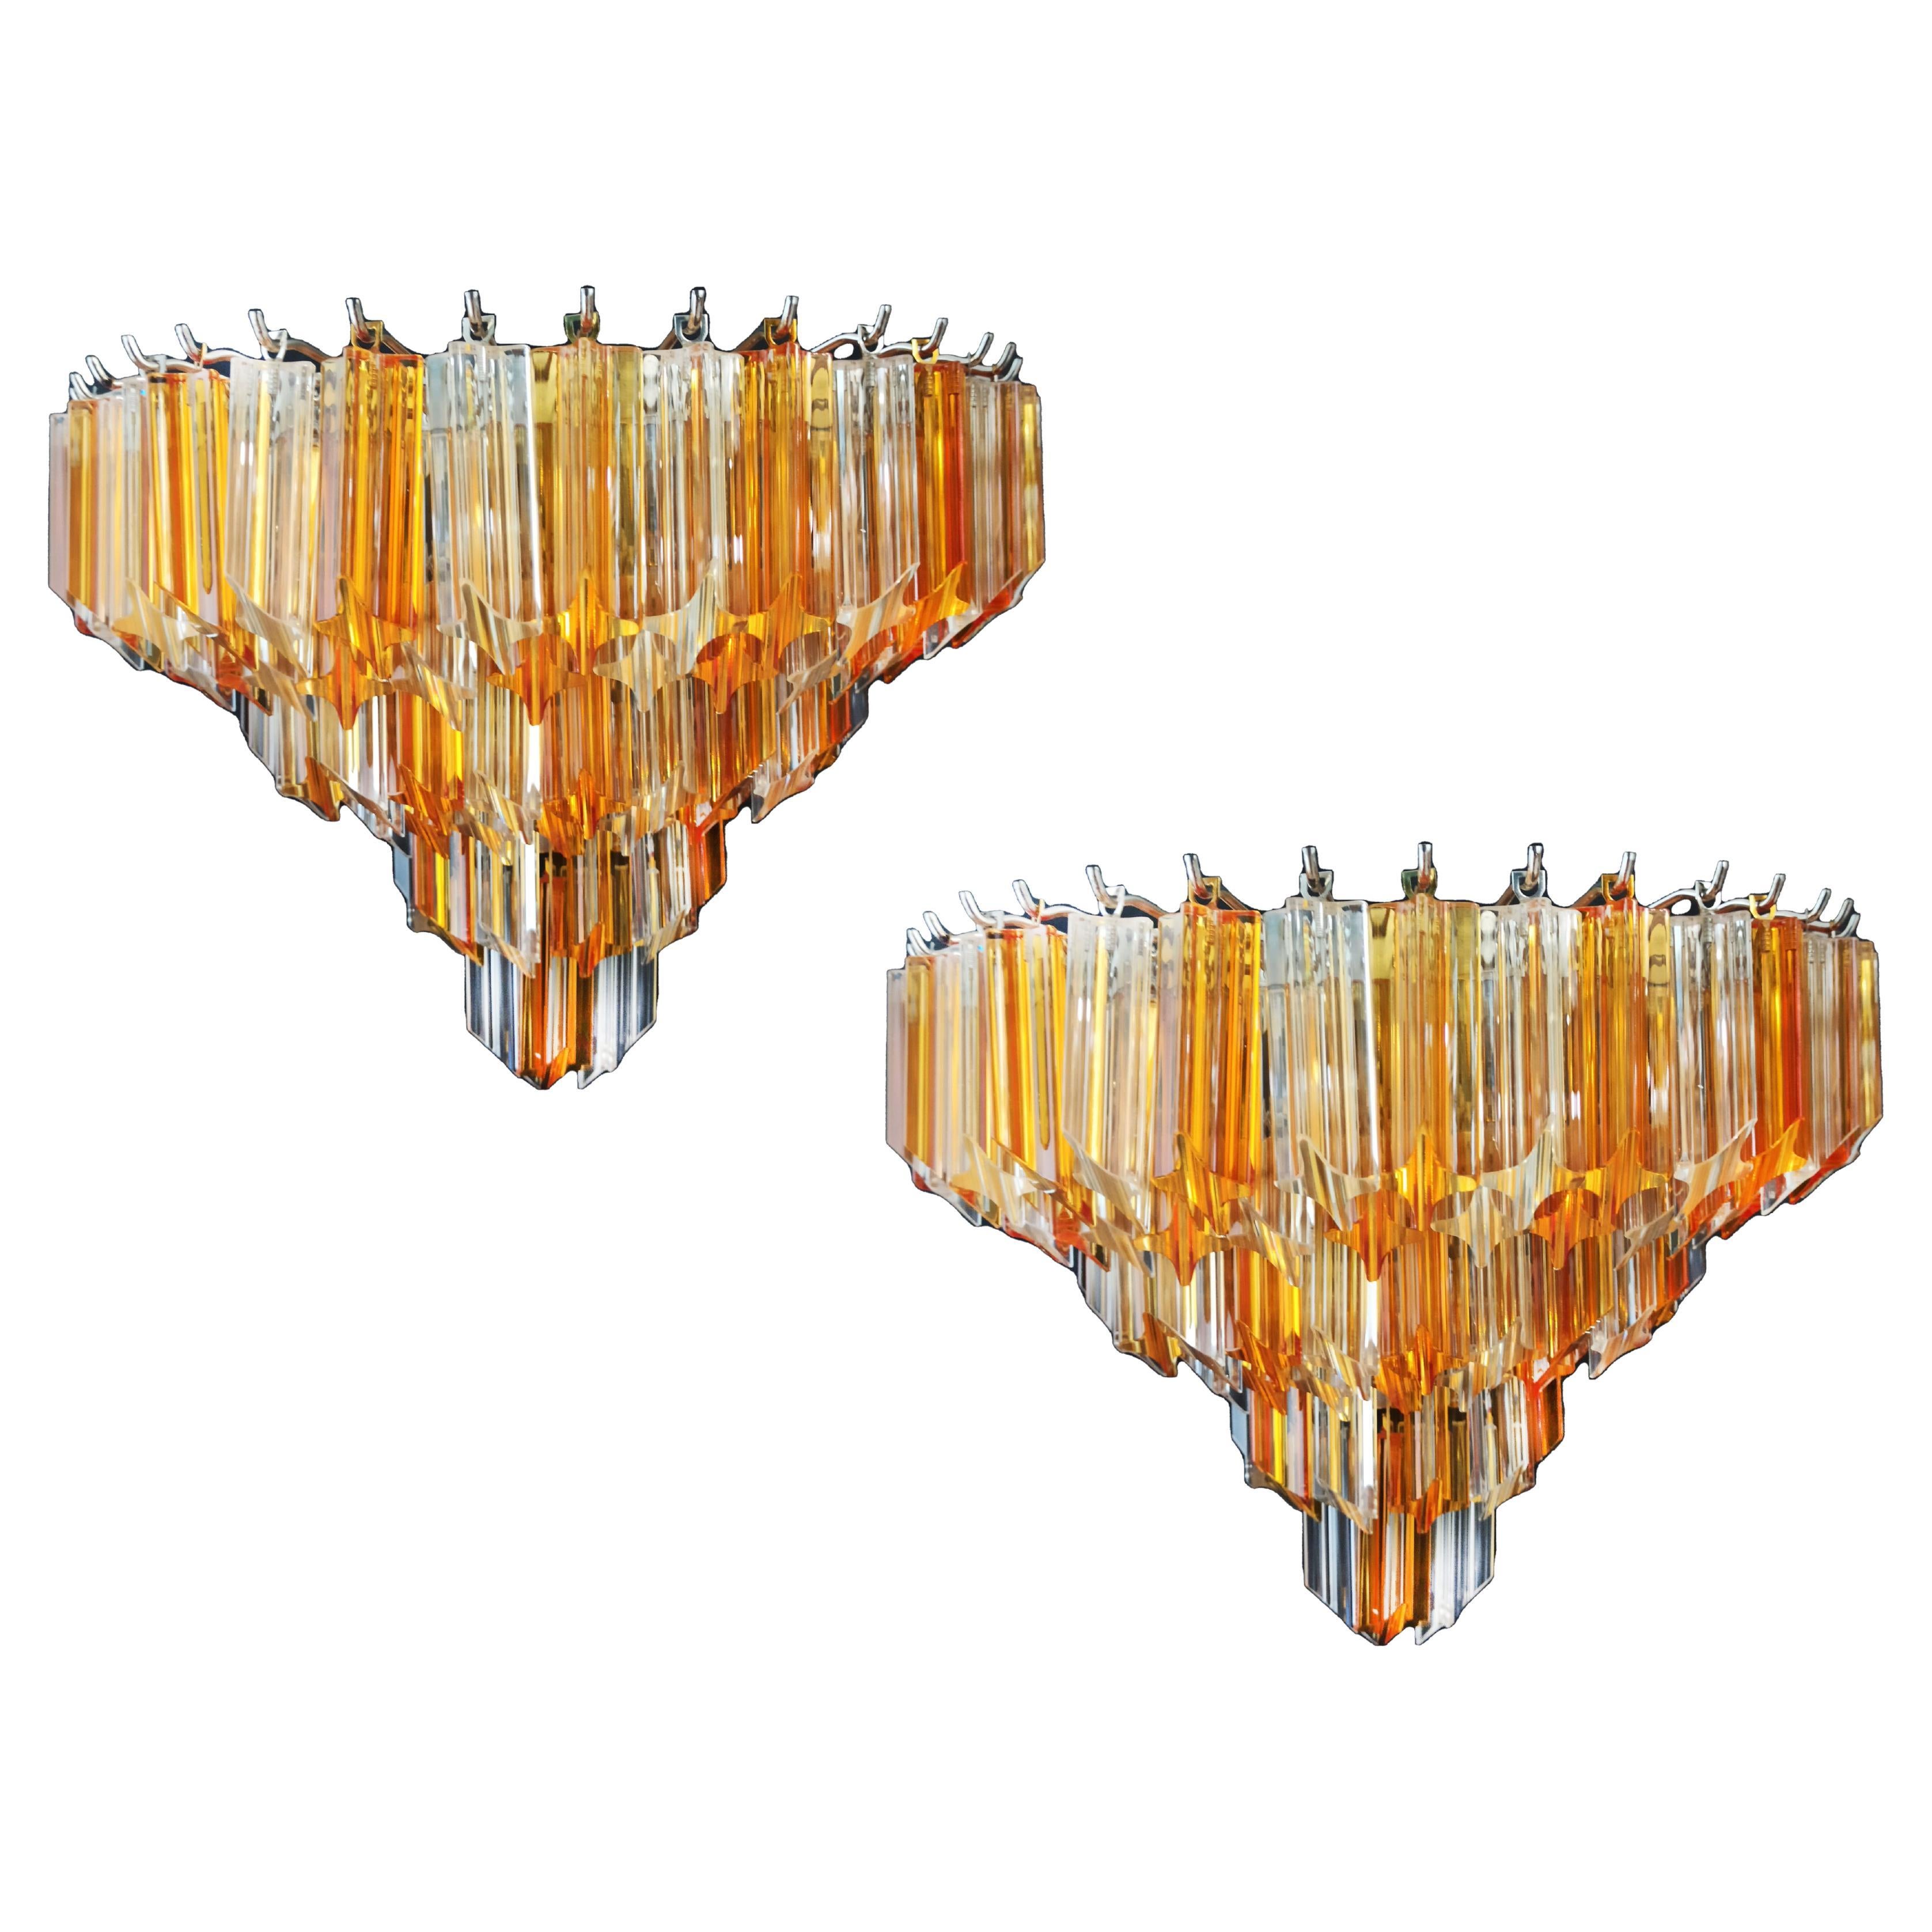 Spectacular Pair of Vintage Murano Wall Sconce